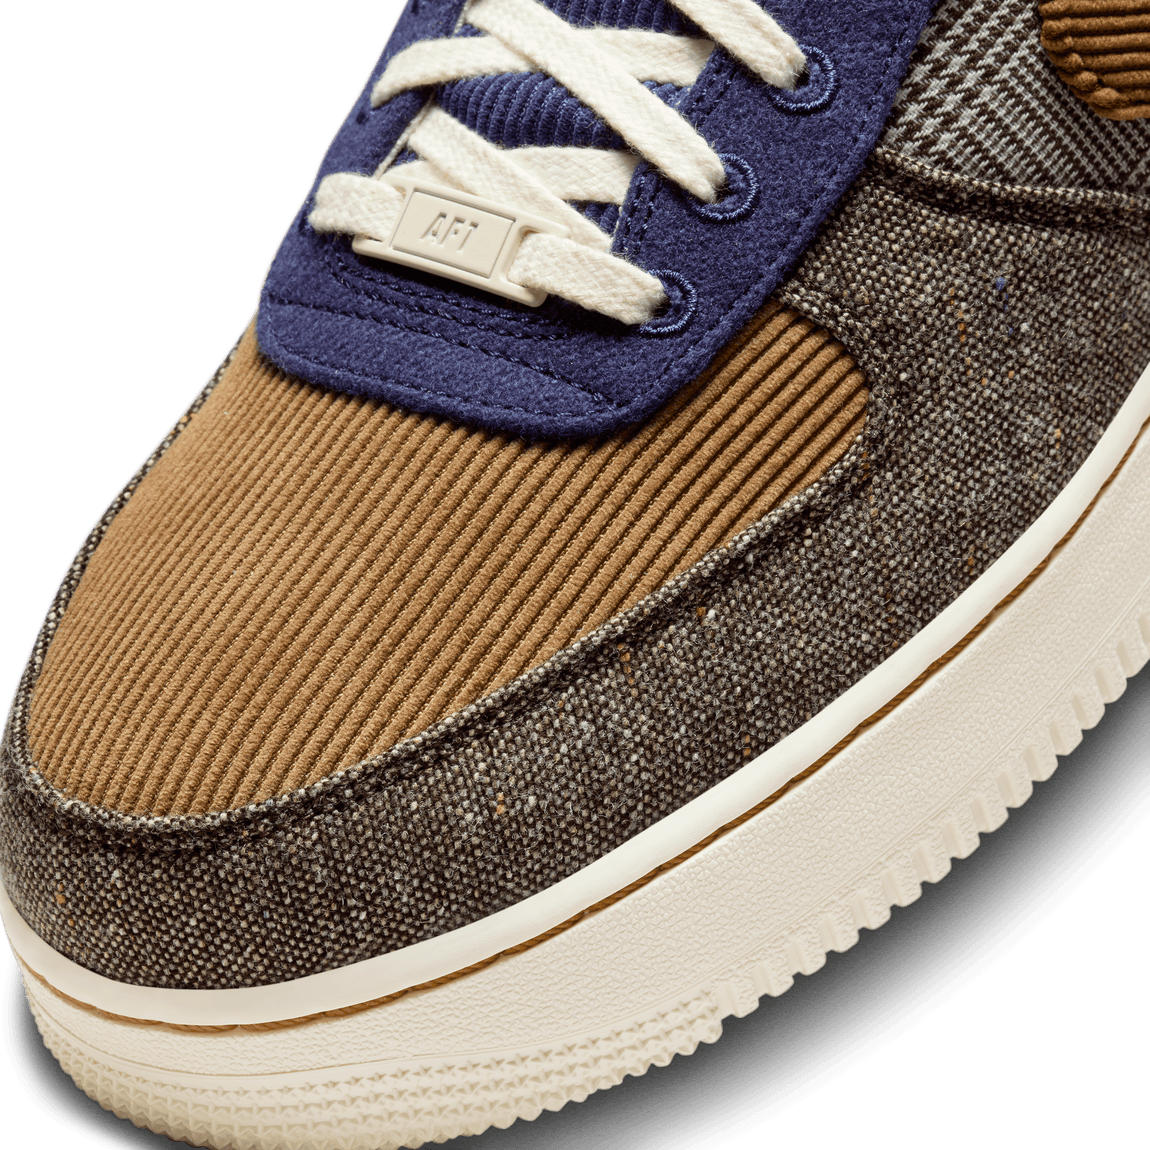 Nike Air Force 1 '07 Premium ( Midnight Navy / Ale Brown / Ivory ) - Nike Air Force 1 '07 Premium ( Midnight Navy / Ale Brown / Ivory ) - 